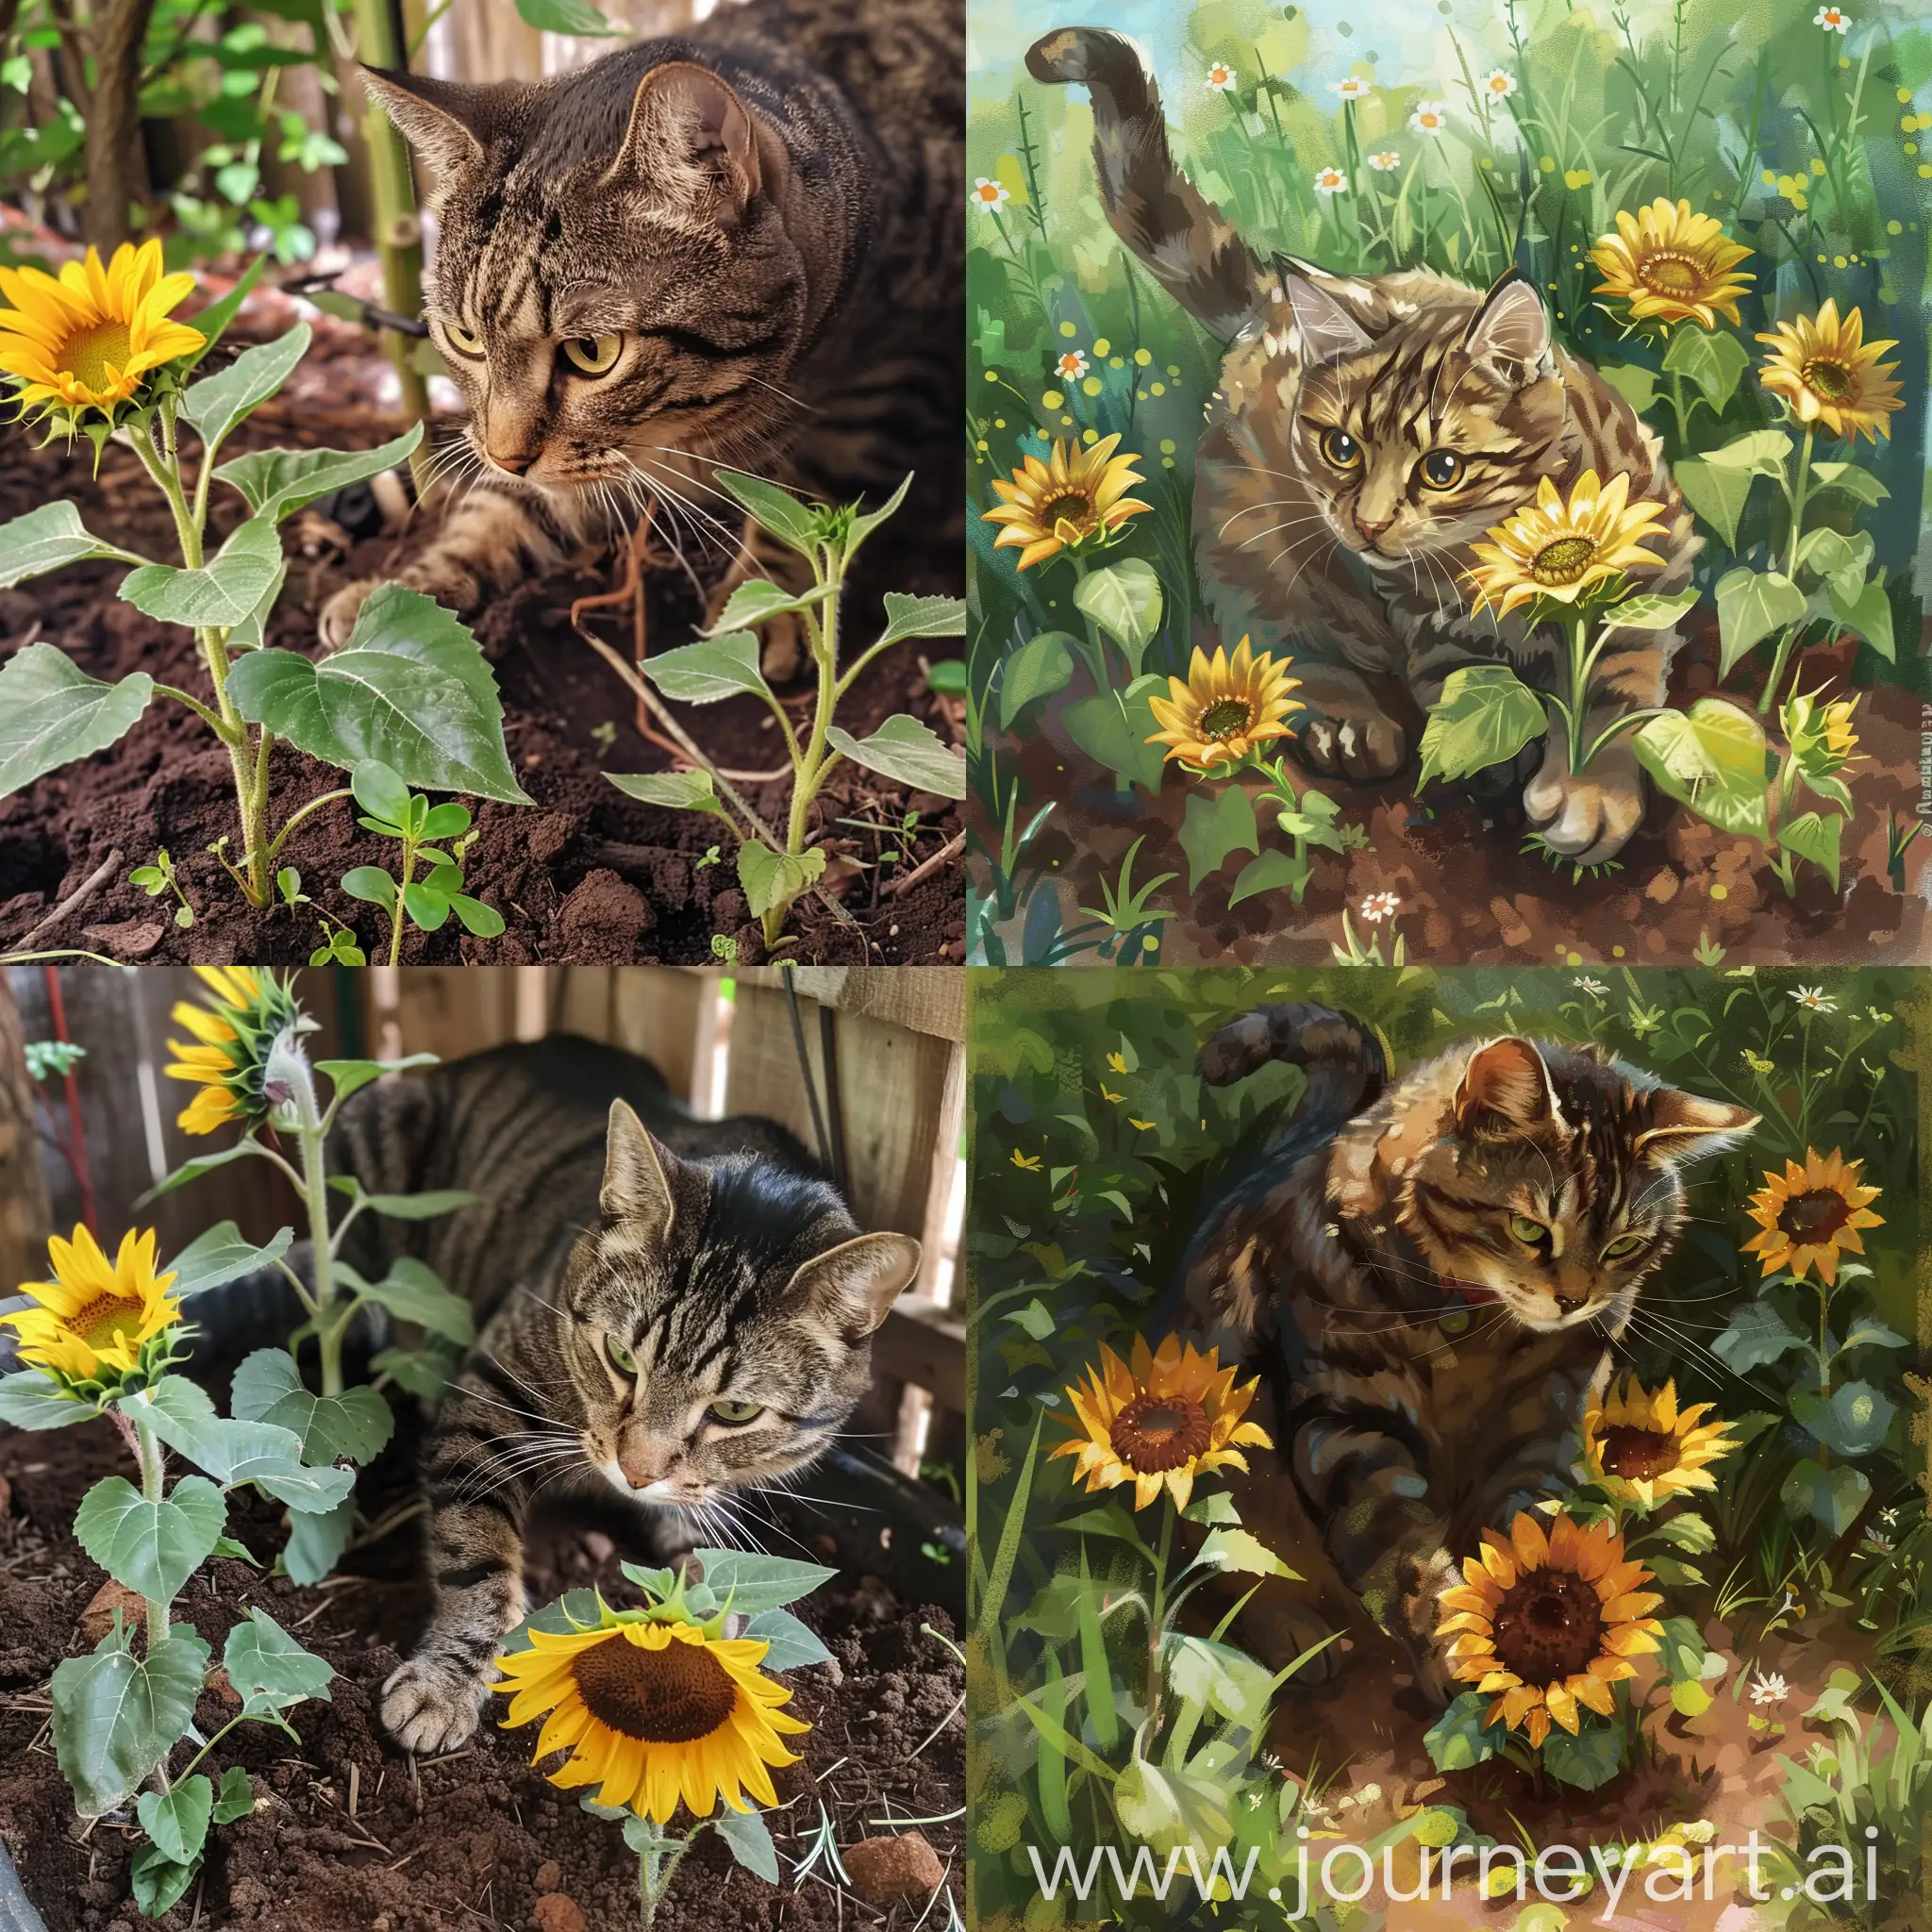 Cat-Gardening-Sunflowers-in-Its-Colorful-Garden